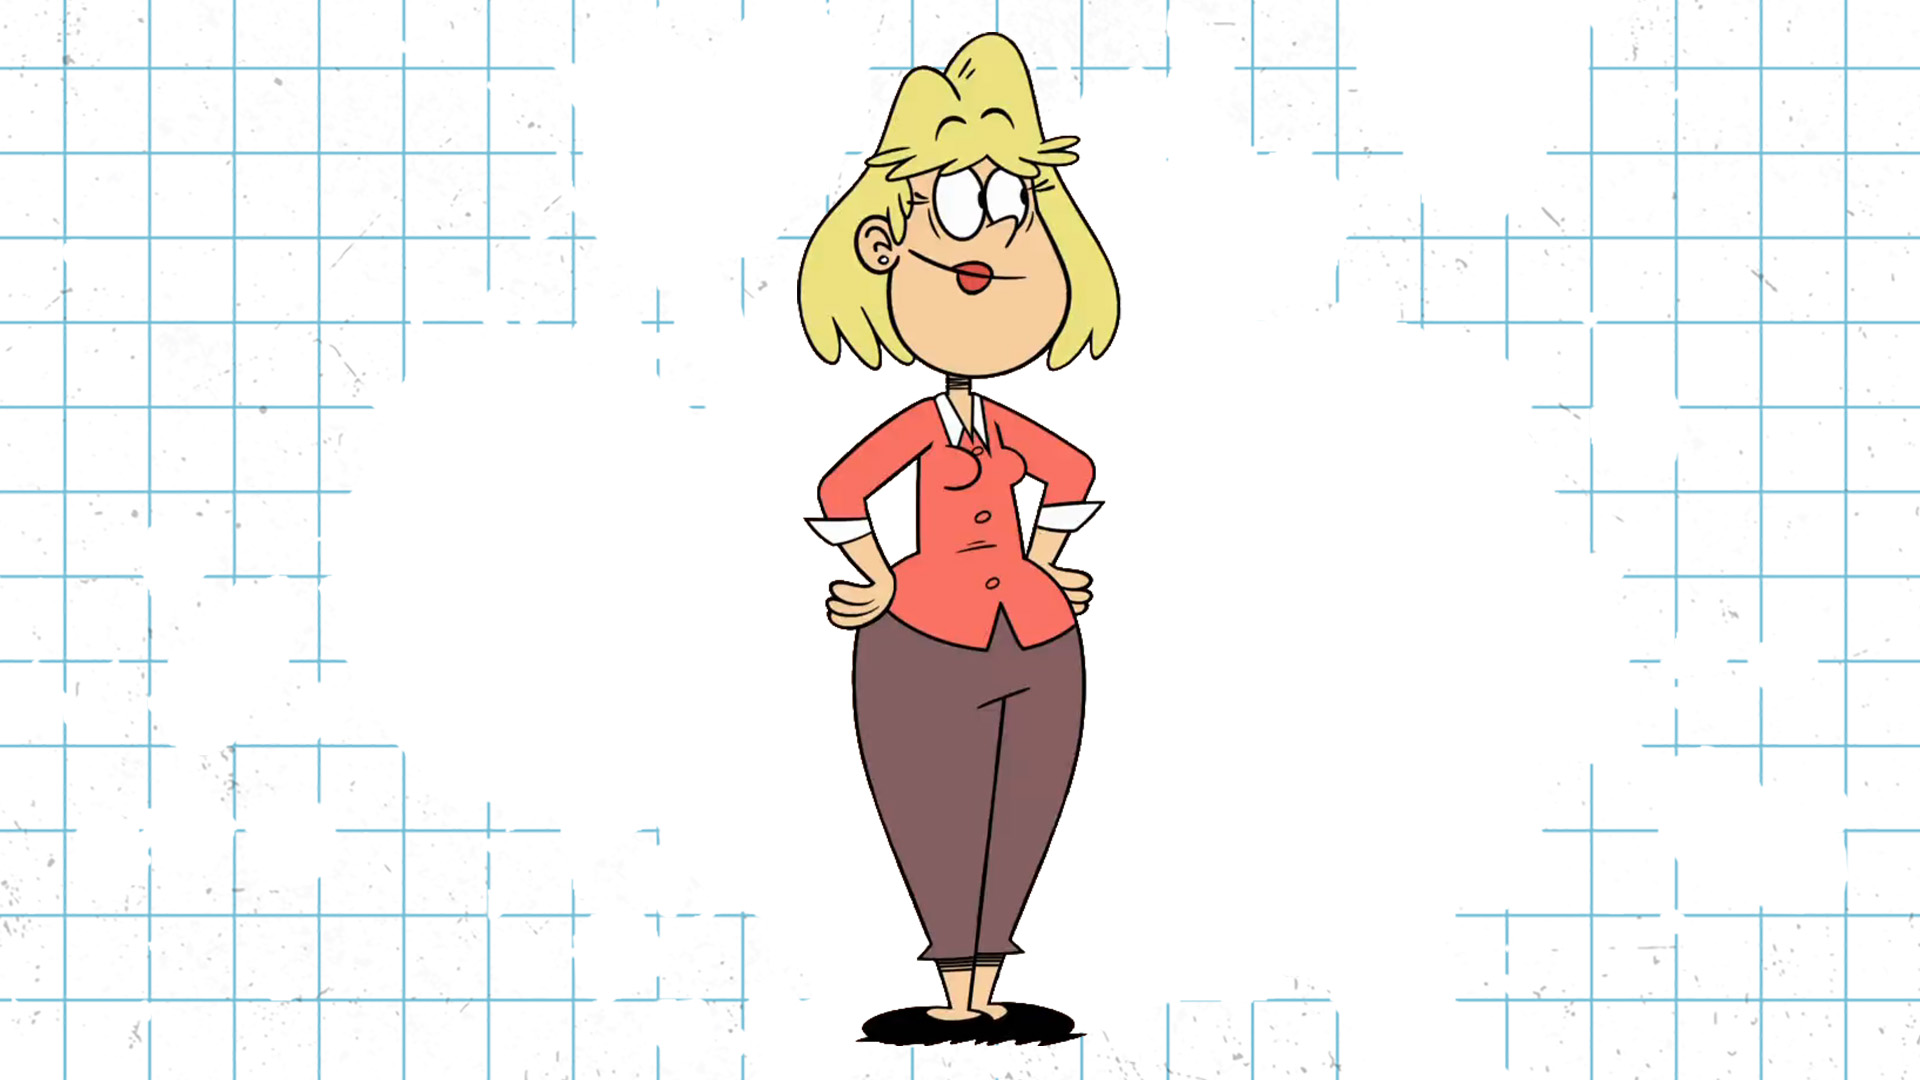 A Loud House character with a blonde bob